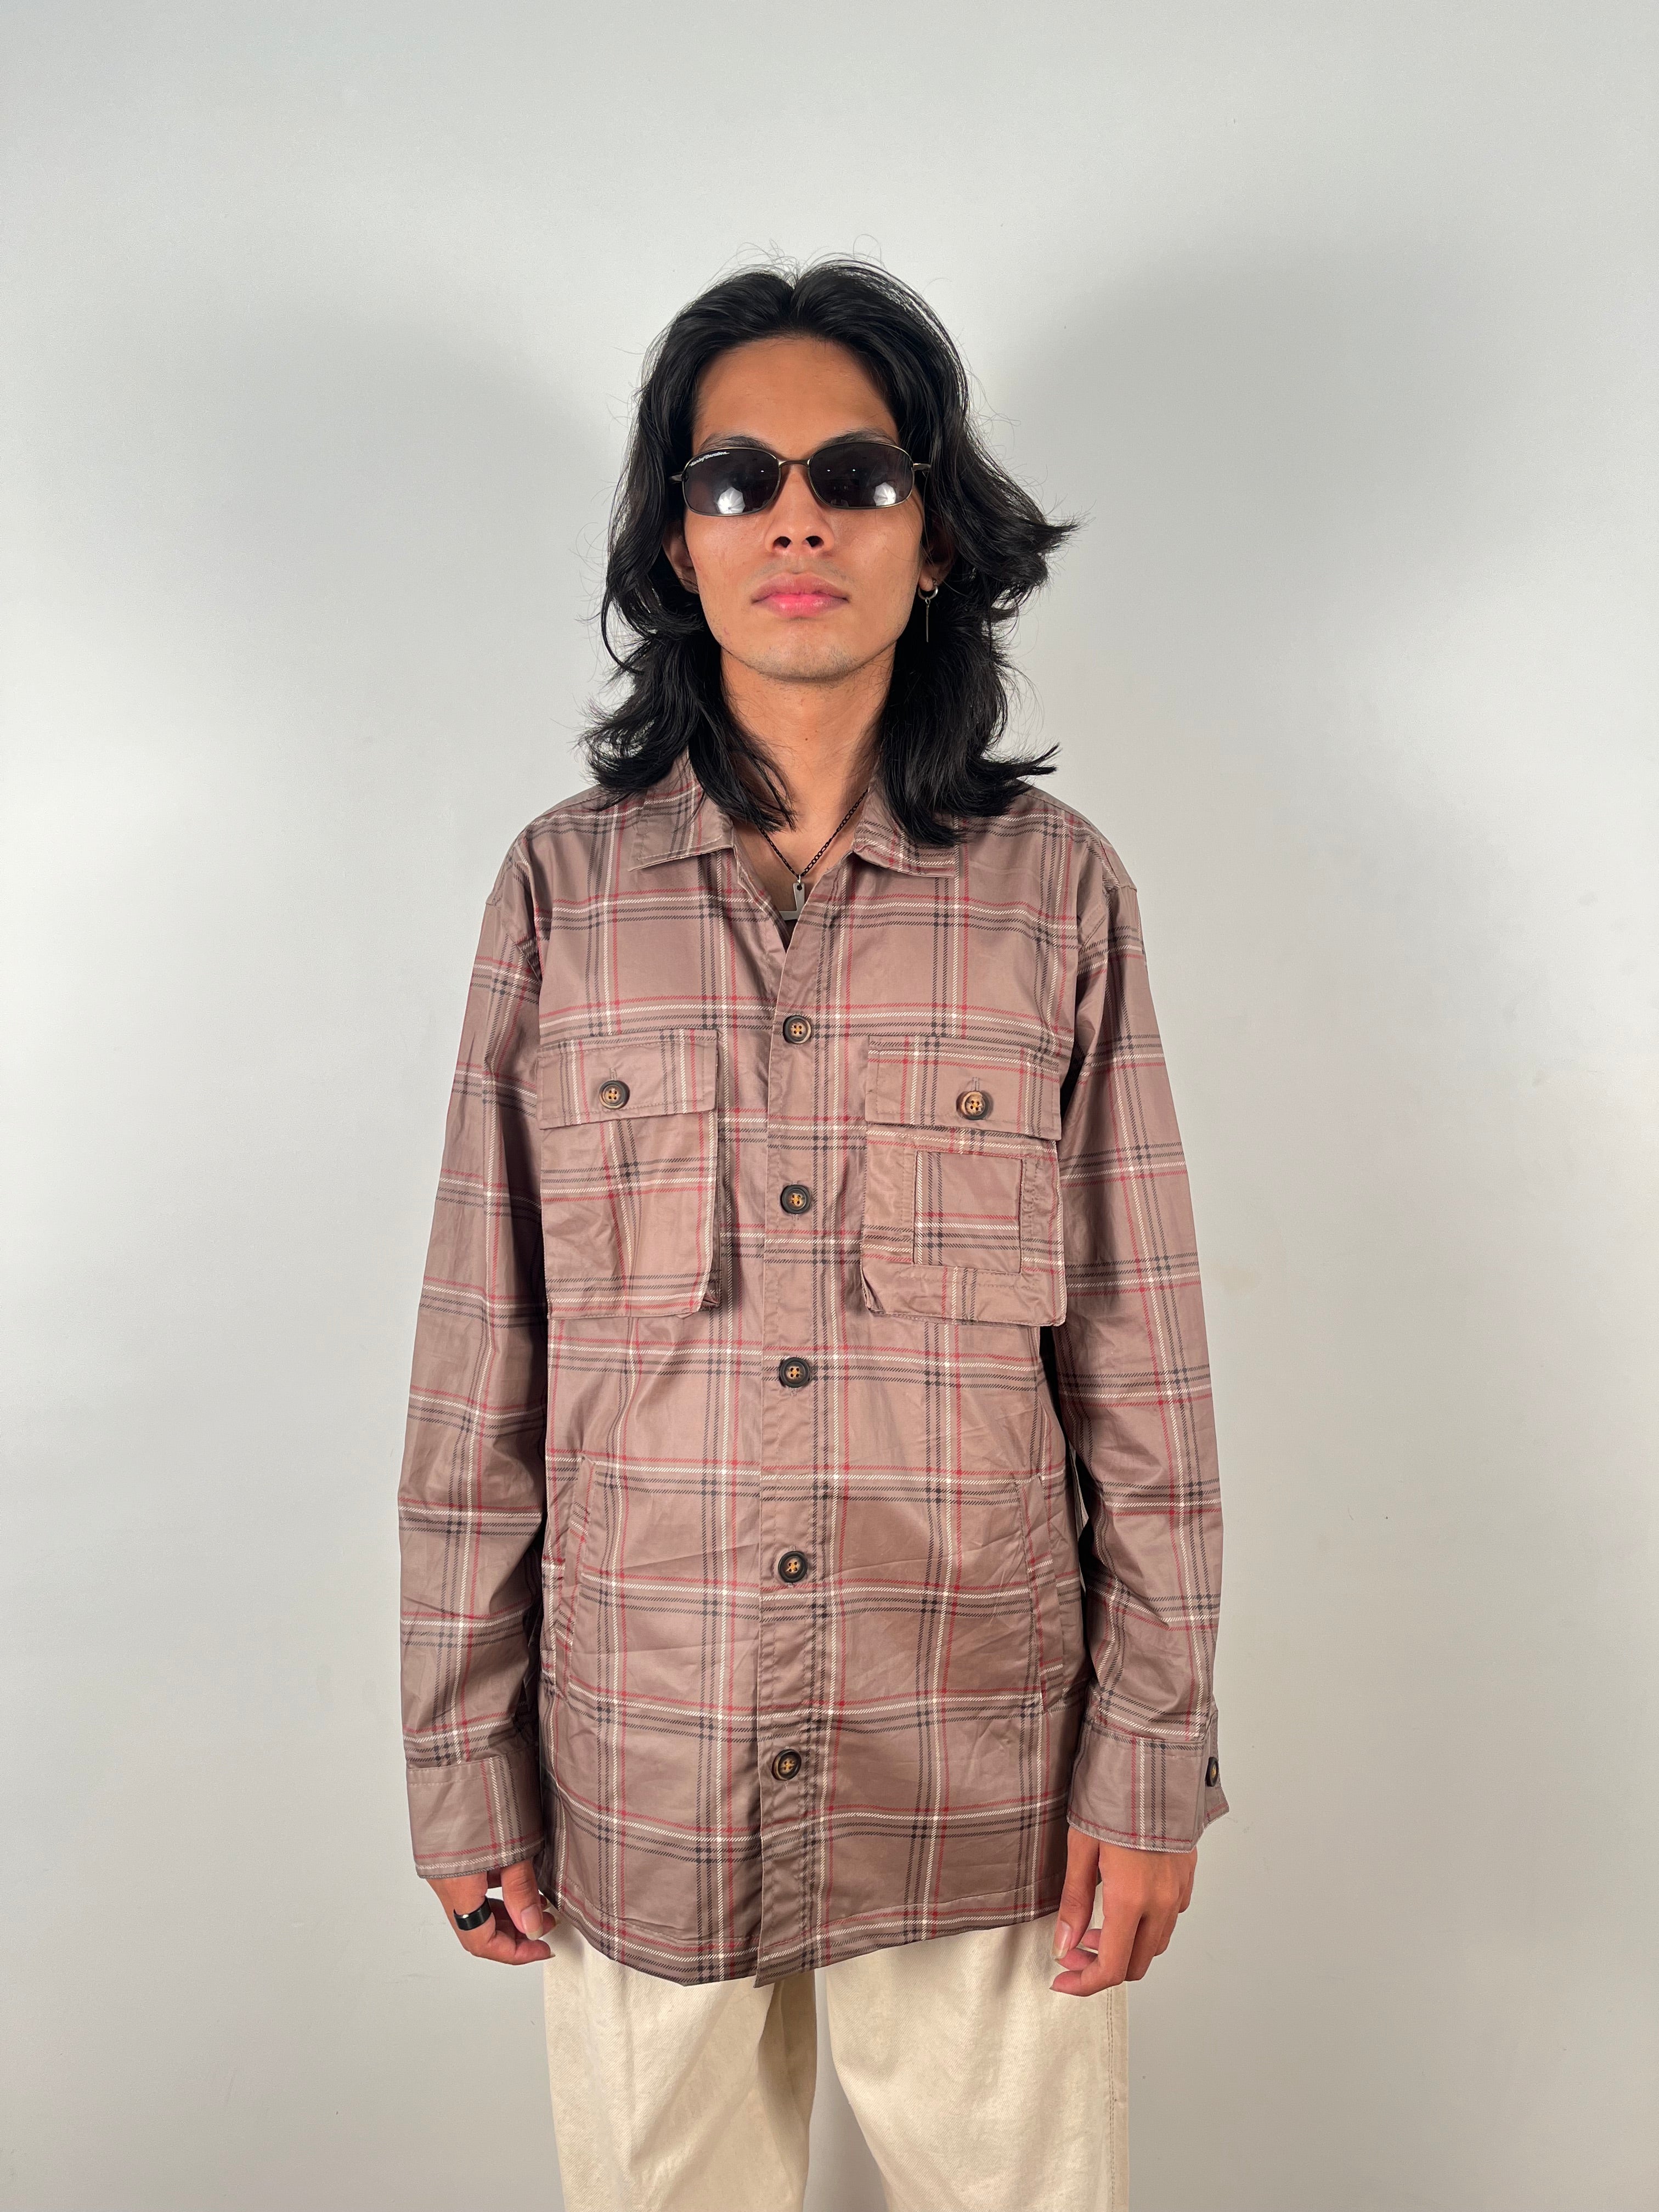 Resistant Chequered Shirt